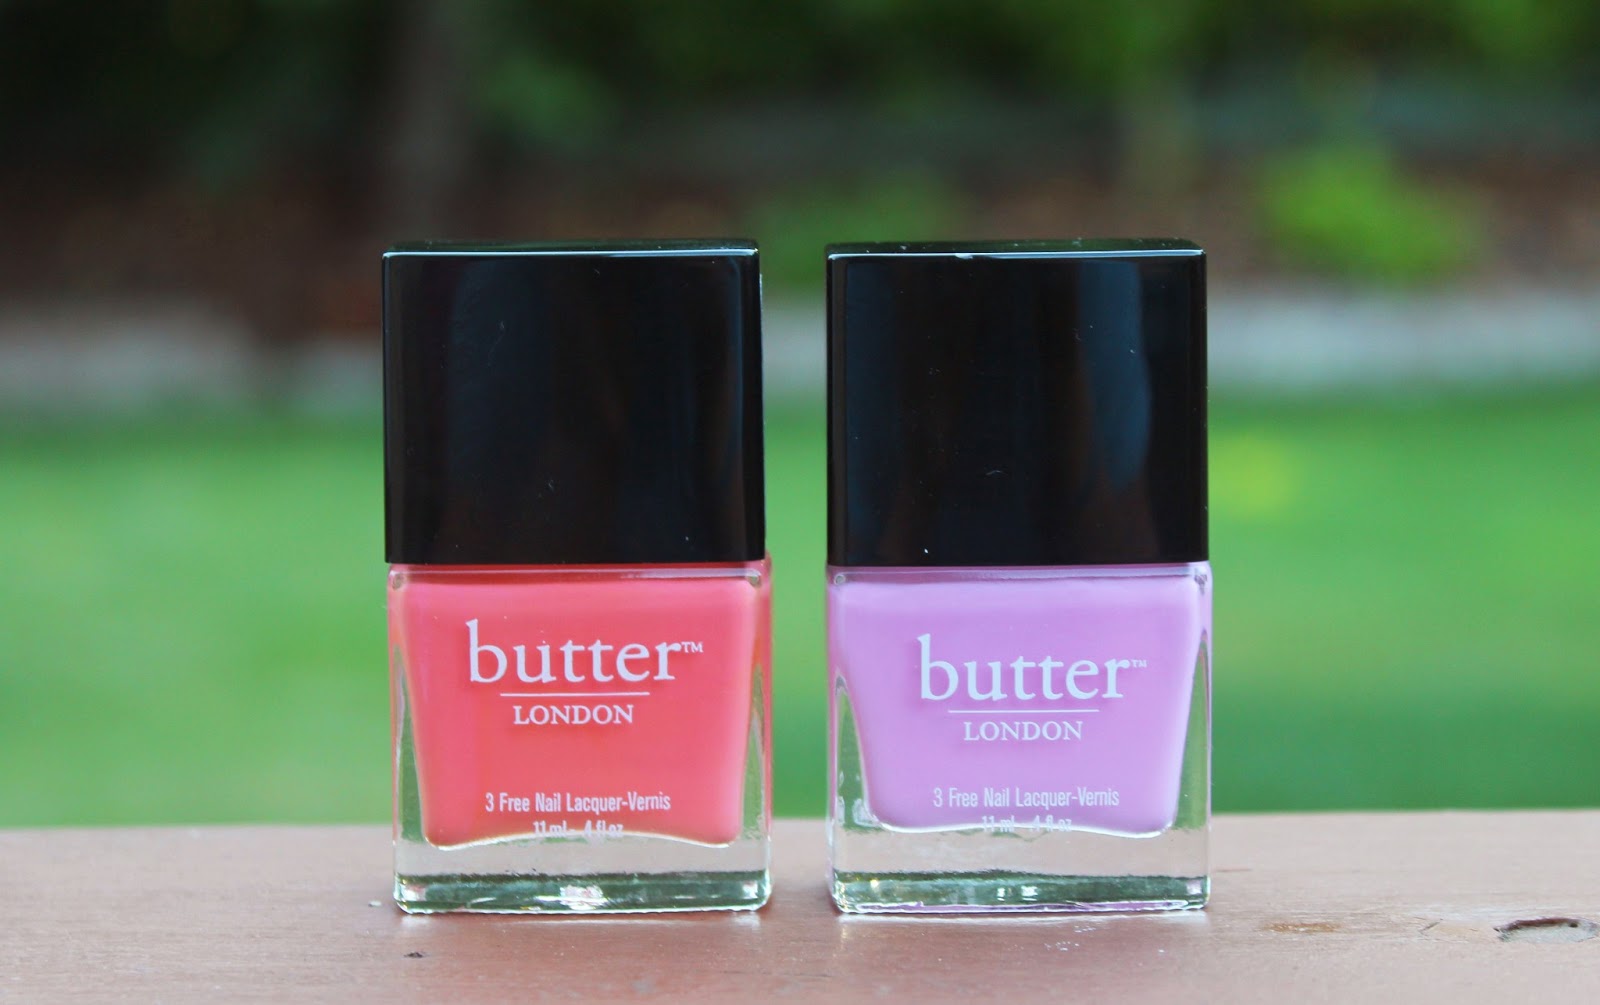 10. Butter London Nail Lacquer in "Come to Bed Red" - wide 8